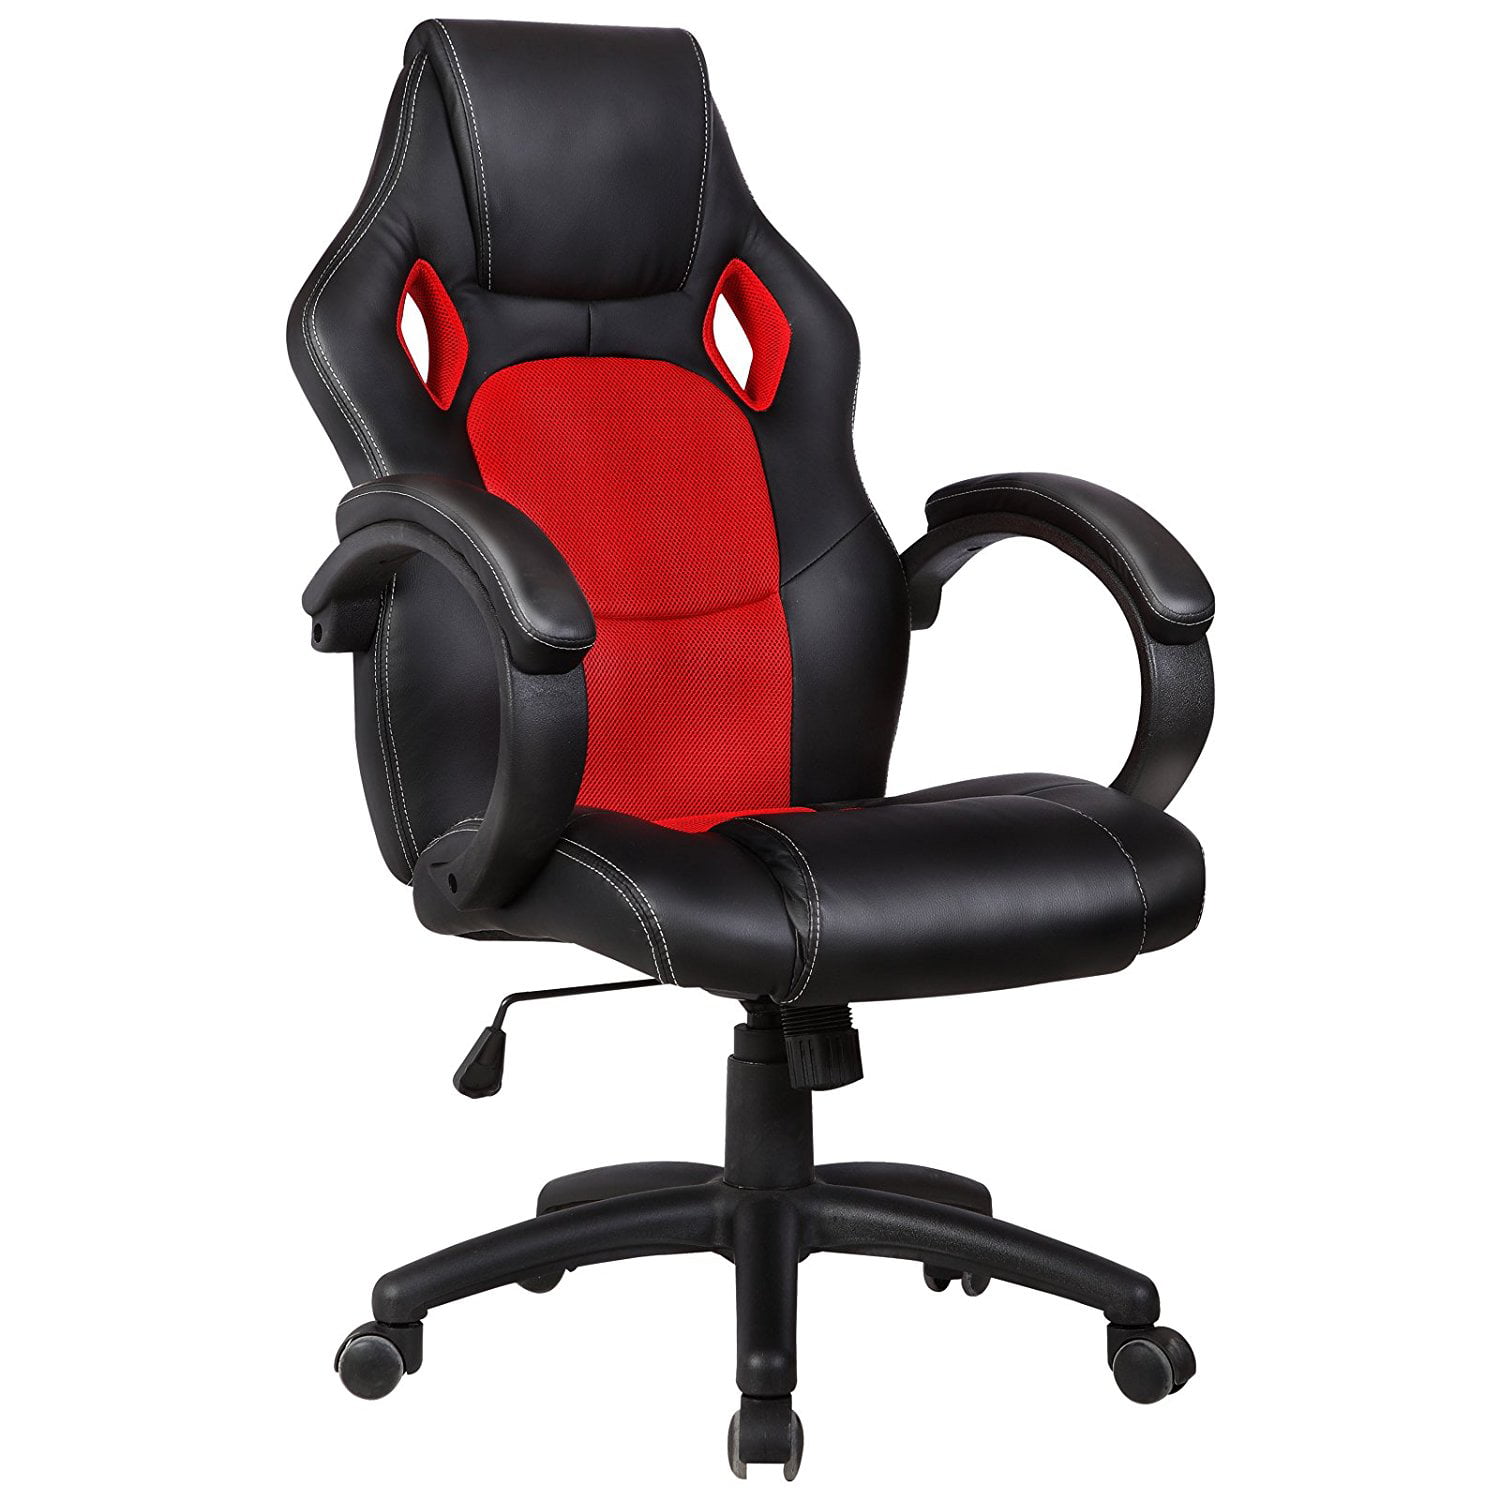 SUNCOO OFFICE CHAIR HIGH BACK EXECUTIVE SWIVEL LEATHER COMPUTER DESK FURNITURE Black Red